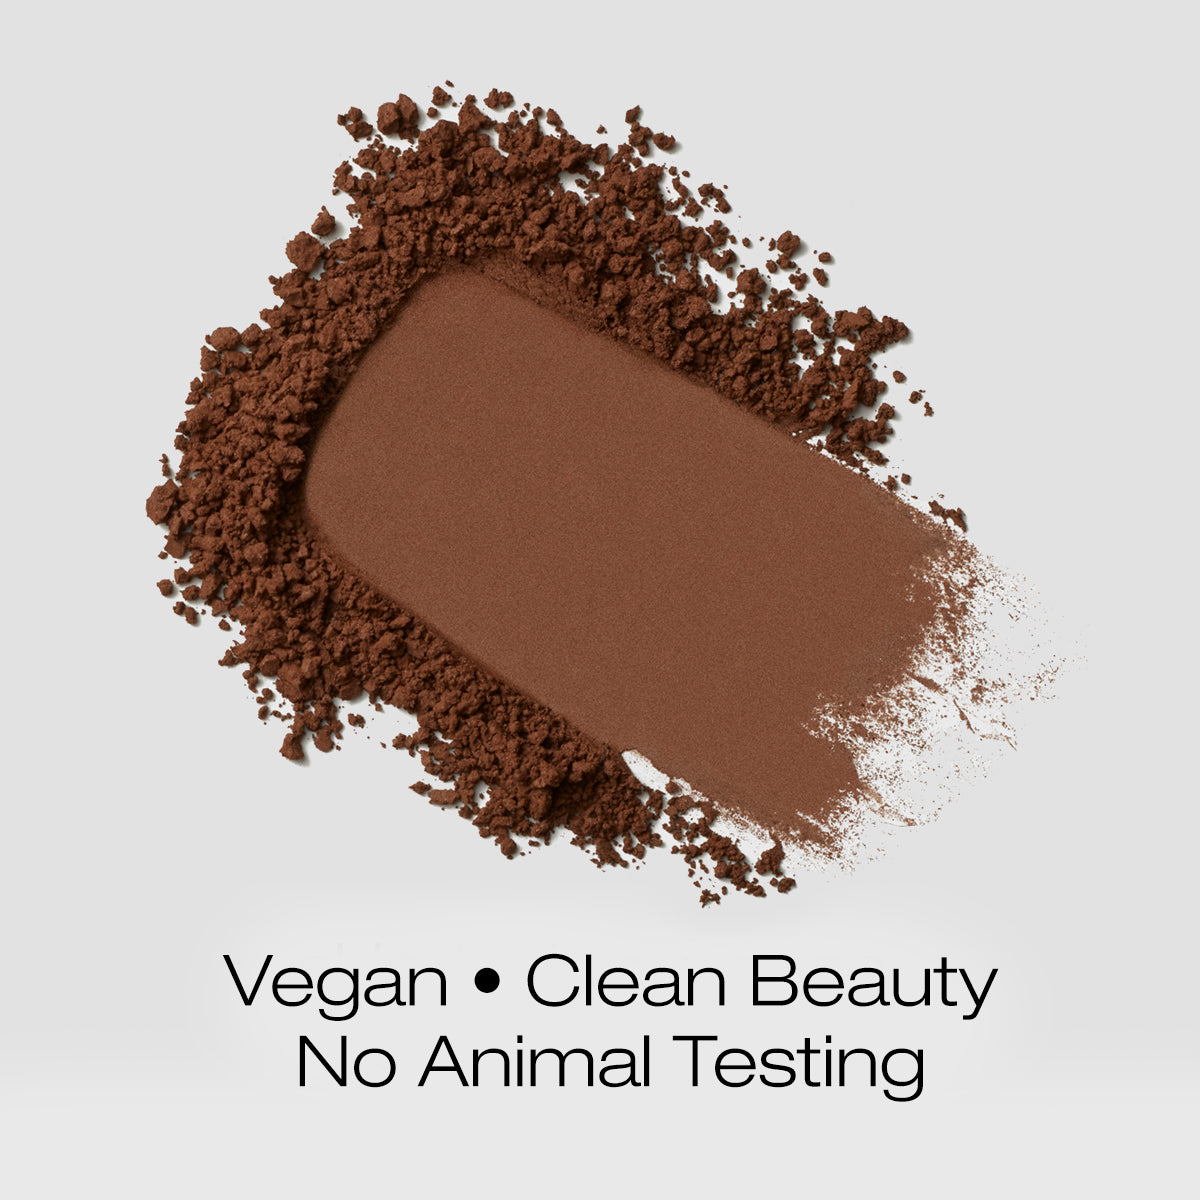 a swatch of rich dark brown colored foundation powder indicating that the formula is vegan, clean beauty and is not tested on animals